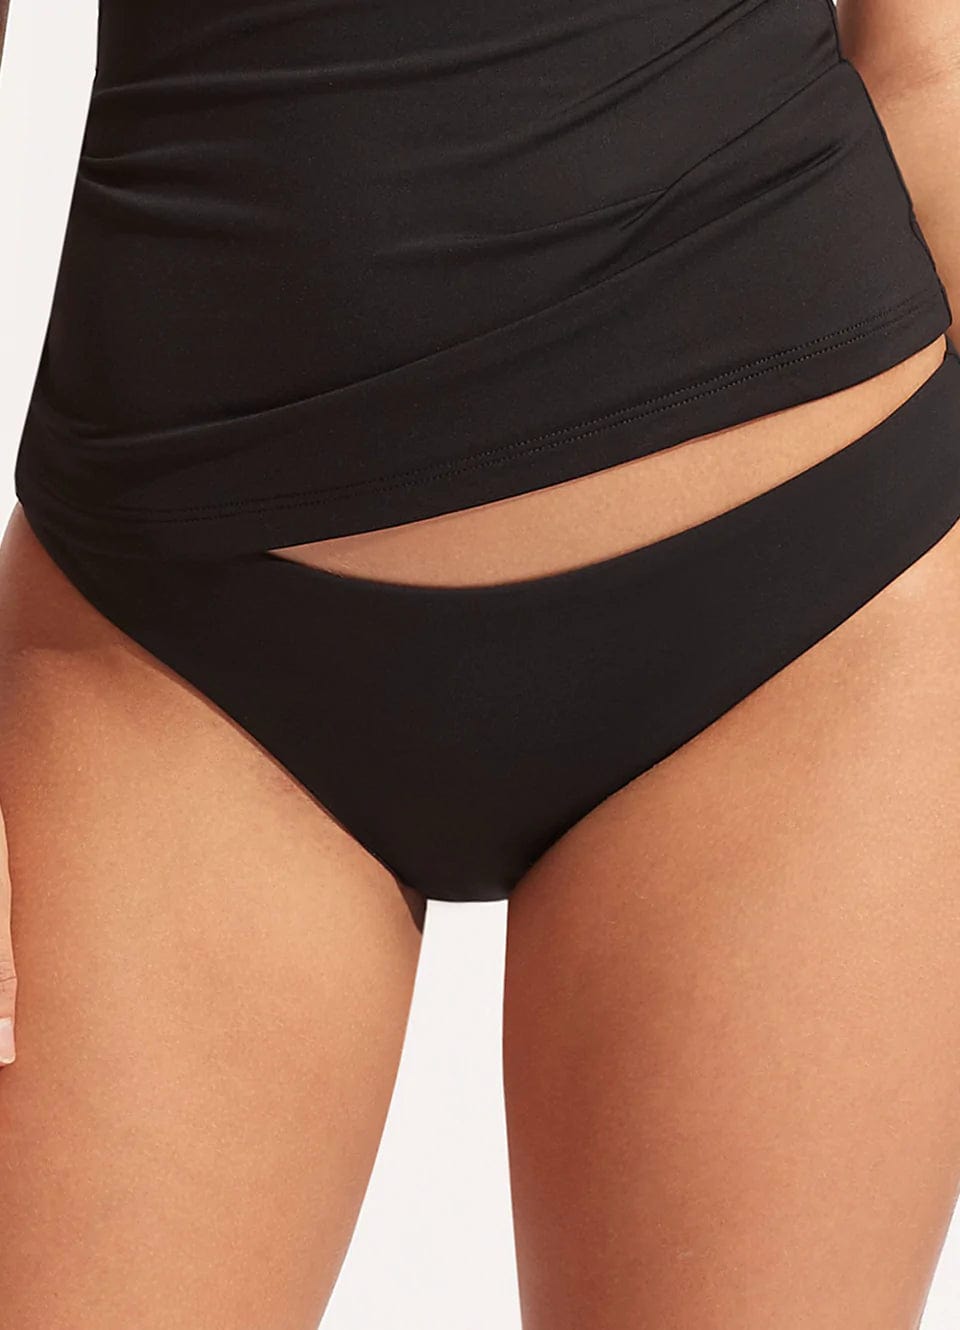 Collective Hipster Pant - Seafolly - Splash Swimwear  - Bikini Bottom, Seafolly, women swimwear - Splash Swimwear 